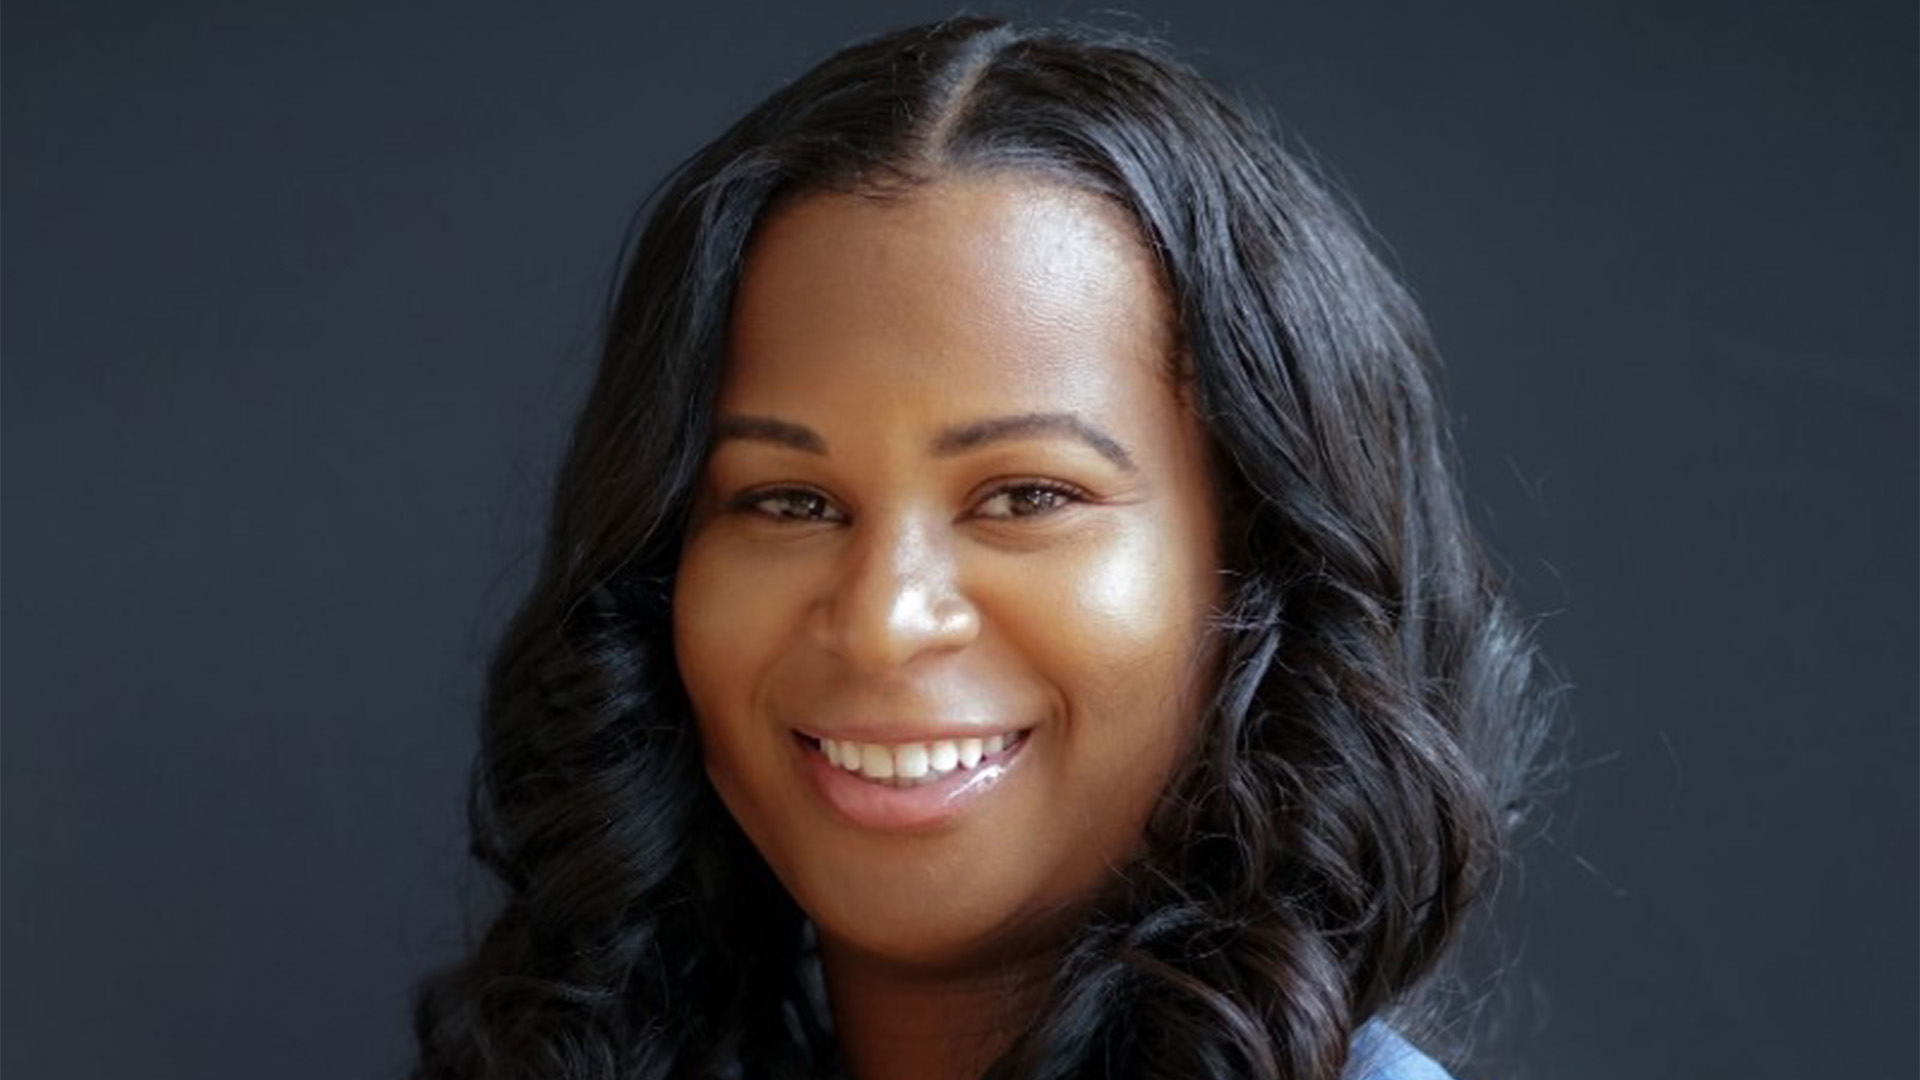 This Former Black Woman Angel Investor Launched A VC Firm For Femtech And Future Of Work Companies